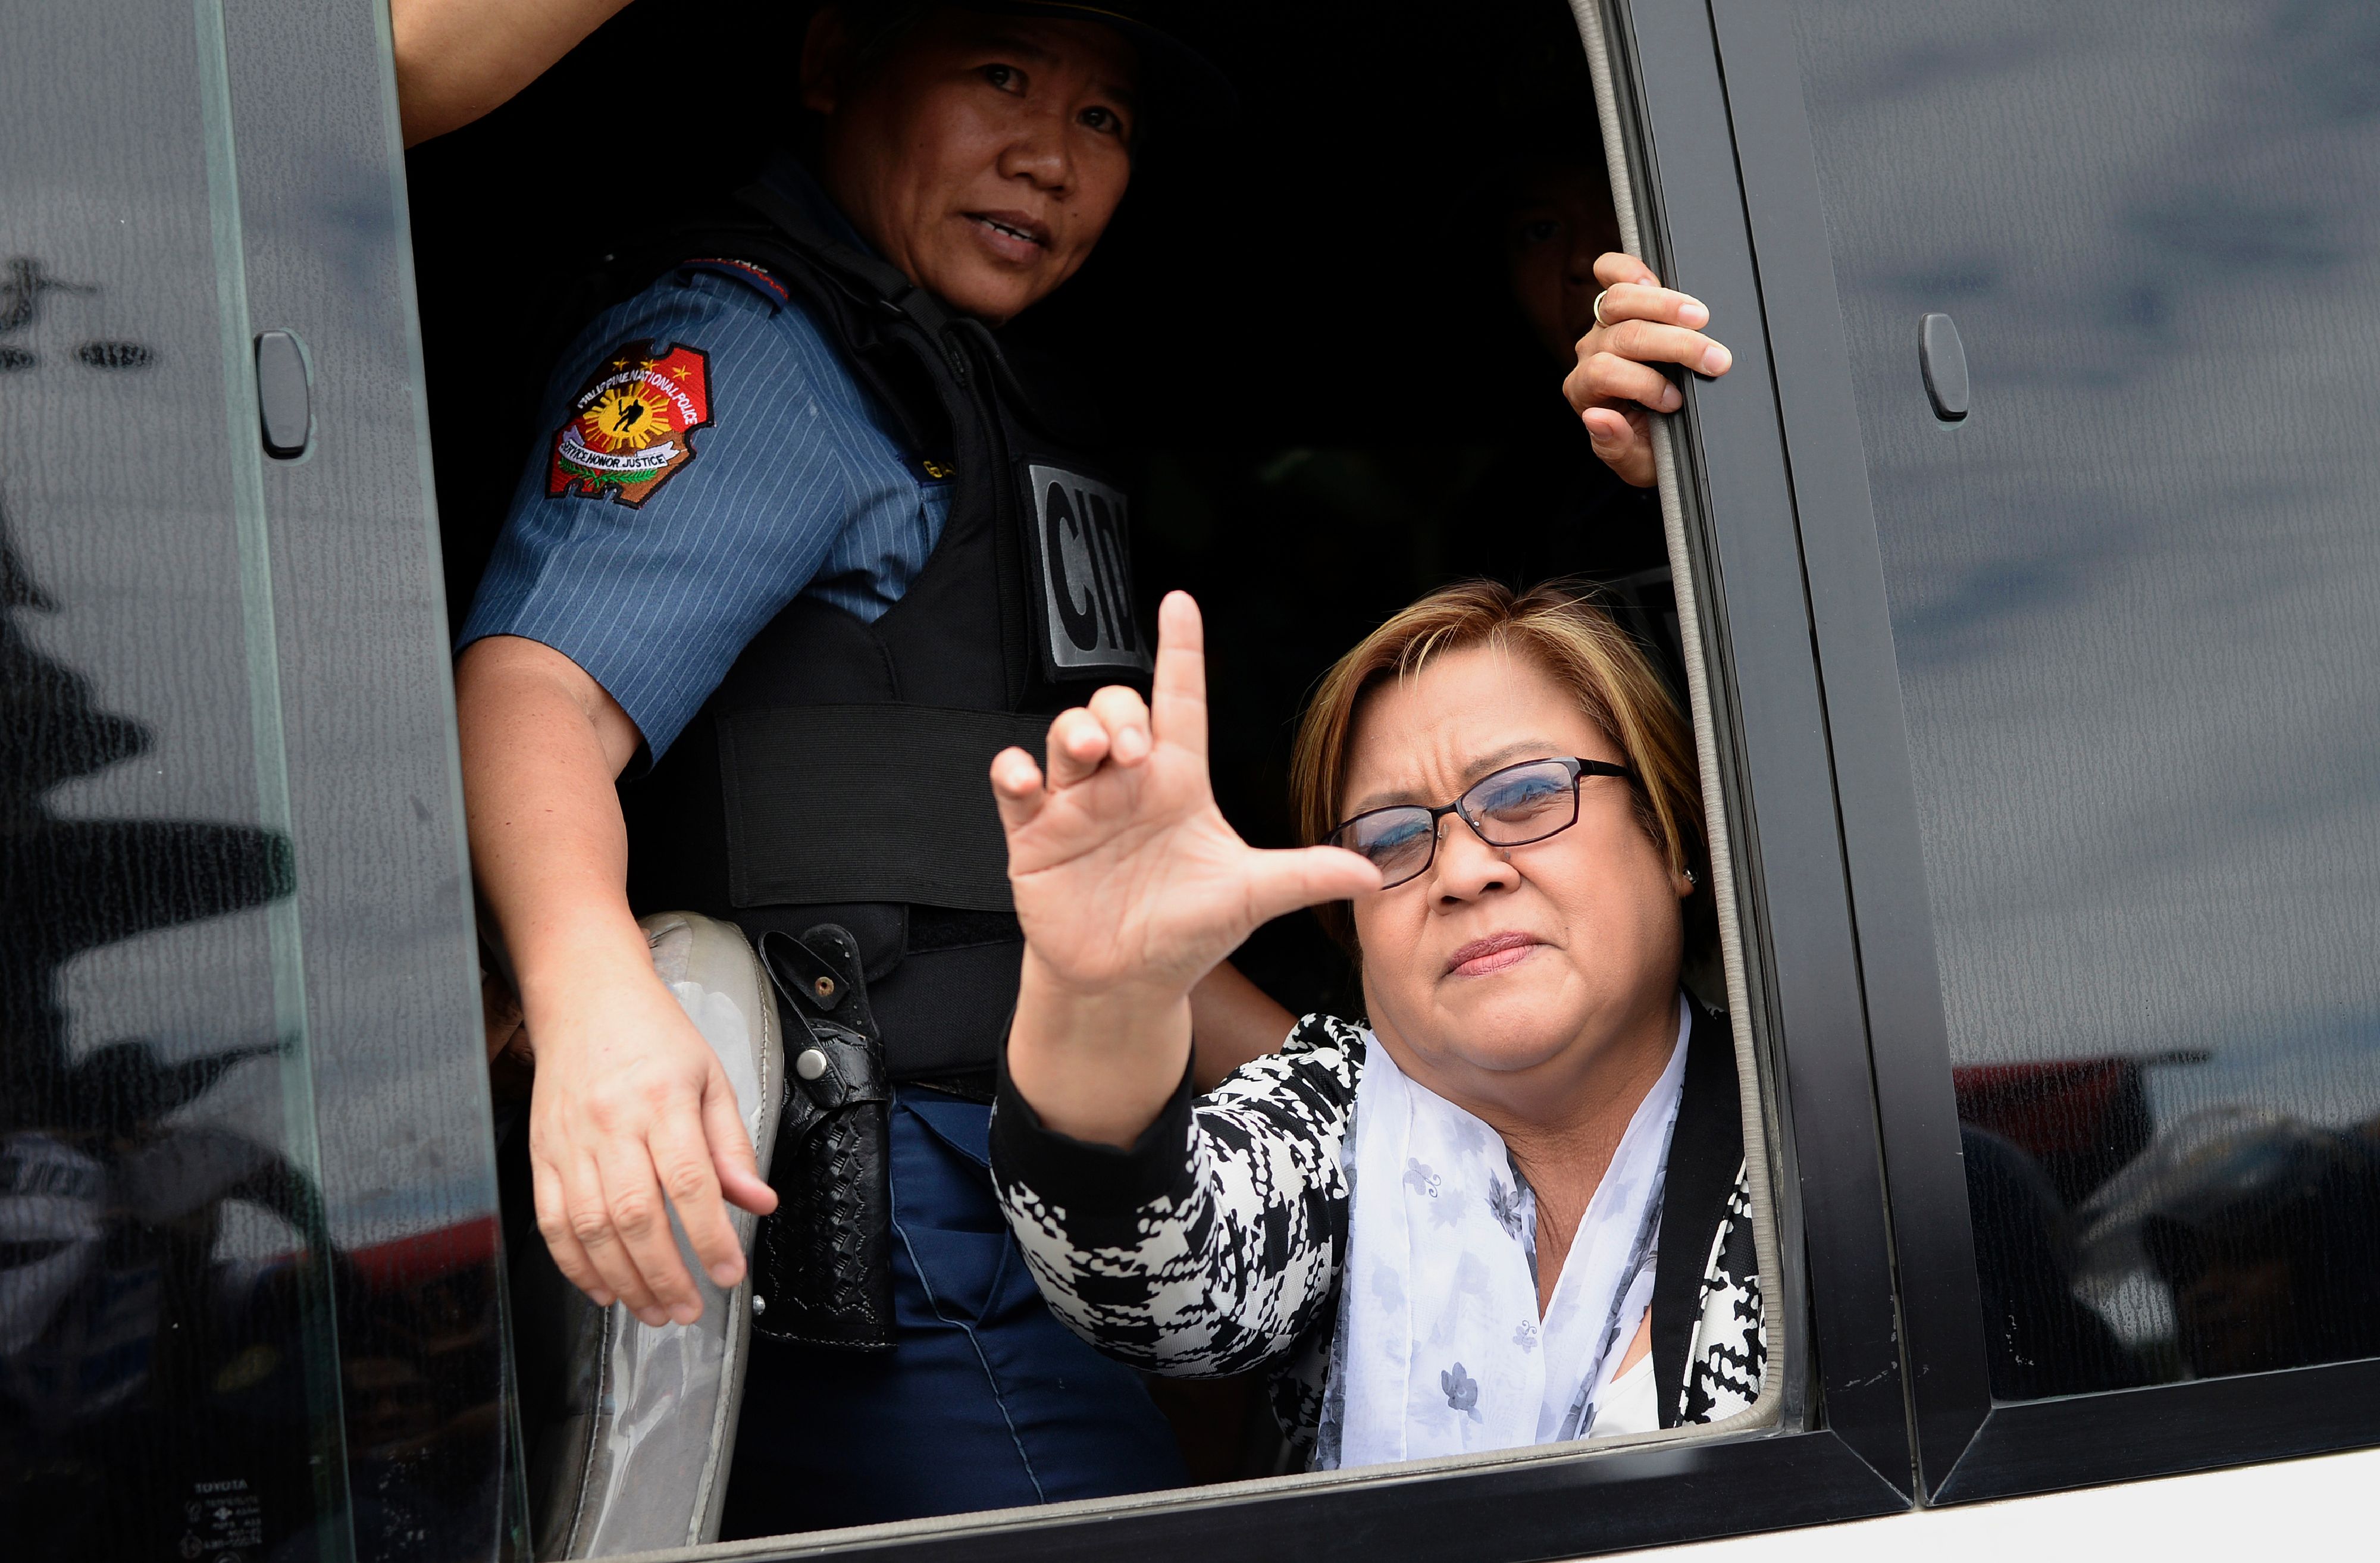 Philippine Senator Leila de Lima, a former human-rights commissioner who is one of Duterte's most vocal opponents, waves to her supporters after appearing at a court in Muntinlupa City, suburban Manila, on Feb. 24, 2017 (Noel Celis—AFP/Getty Images)